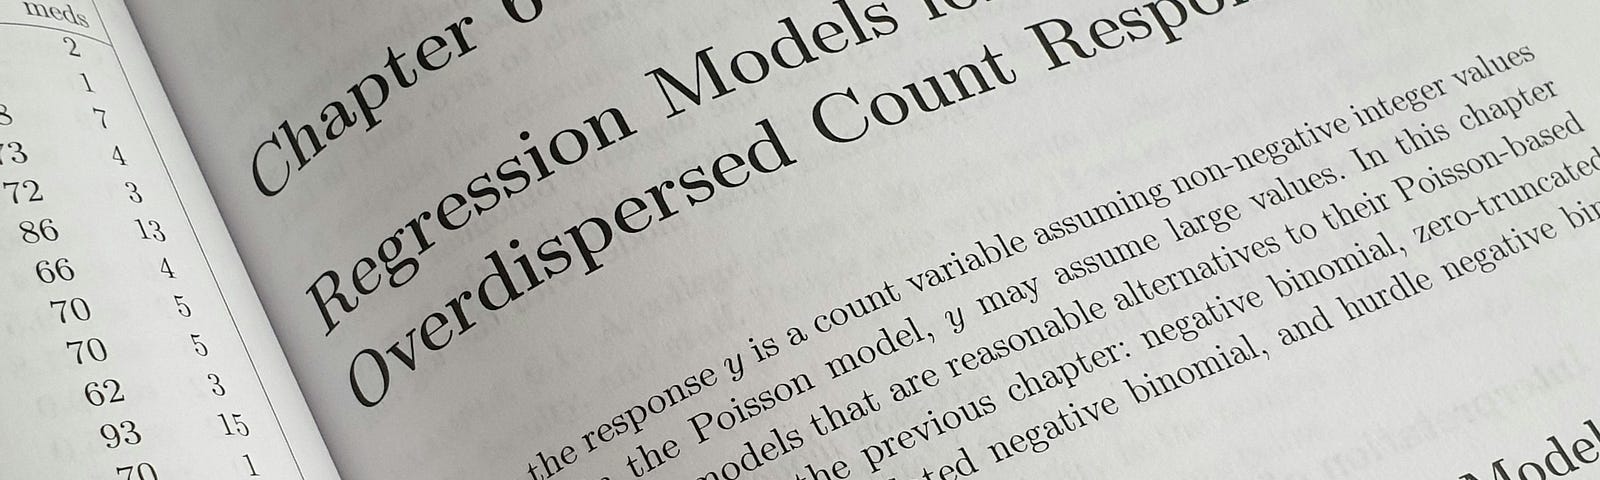 Open book showing Chapter 6 titled ‘Regression Models for Overdispersed Count Response’ discussing negative binomial regression models.